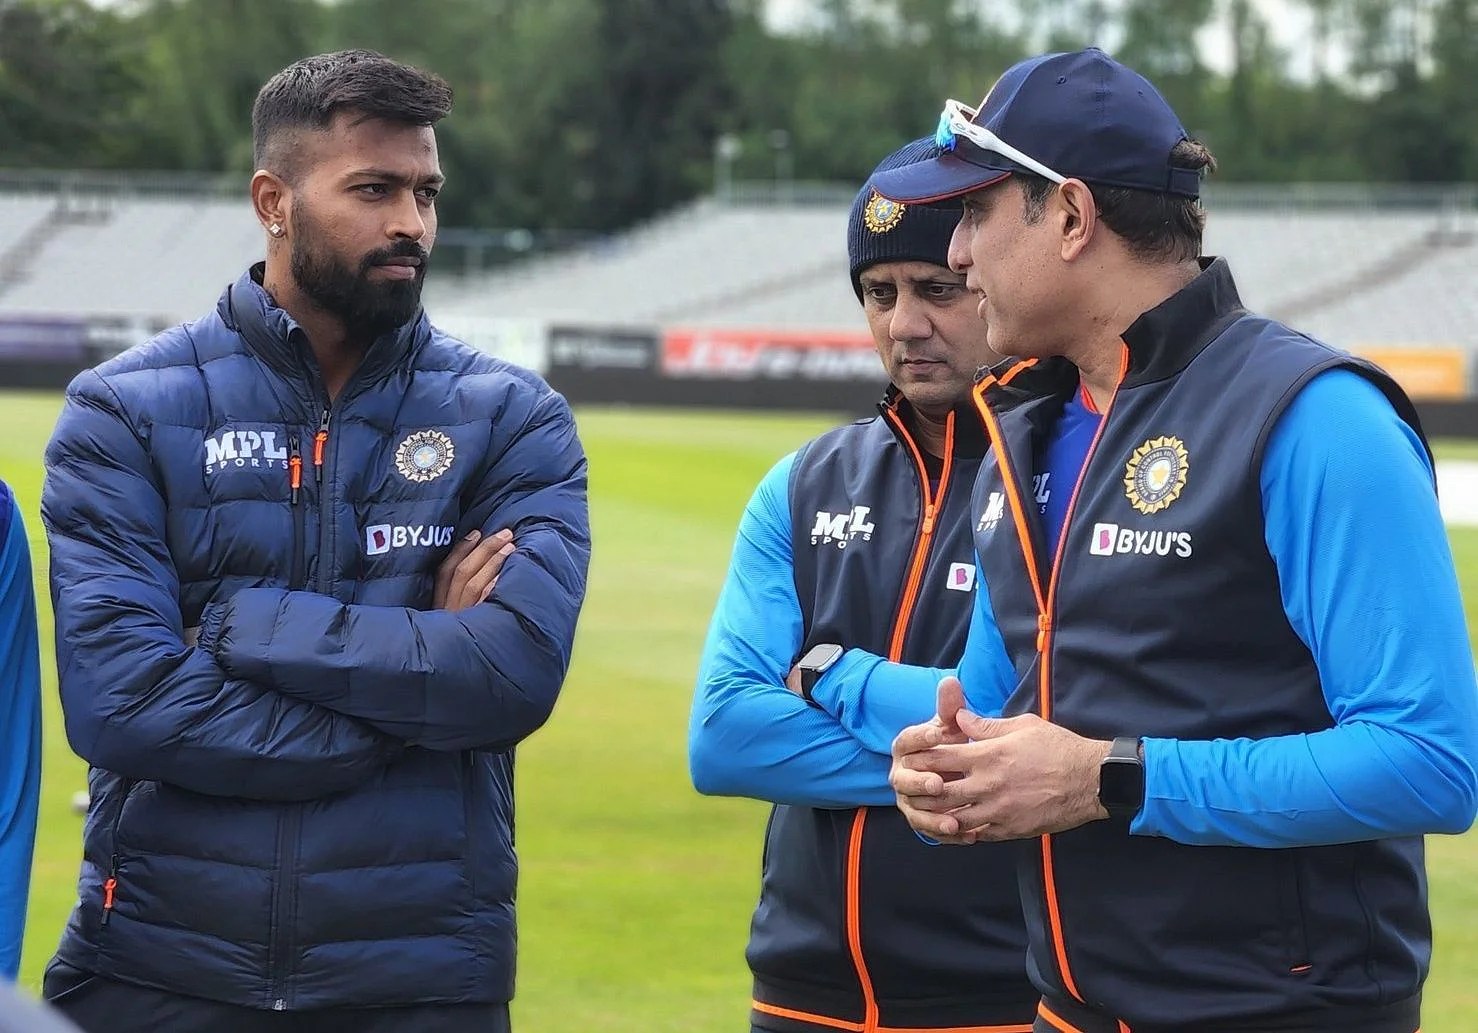 India tour of NZ: Break ends for T20 WC stars, Hardik Pandya and Co set to resume training, VVS Laxman and staff to fly in on Monday - Follow LIVE Updates